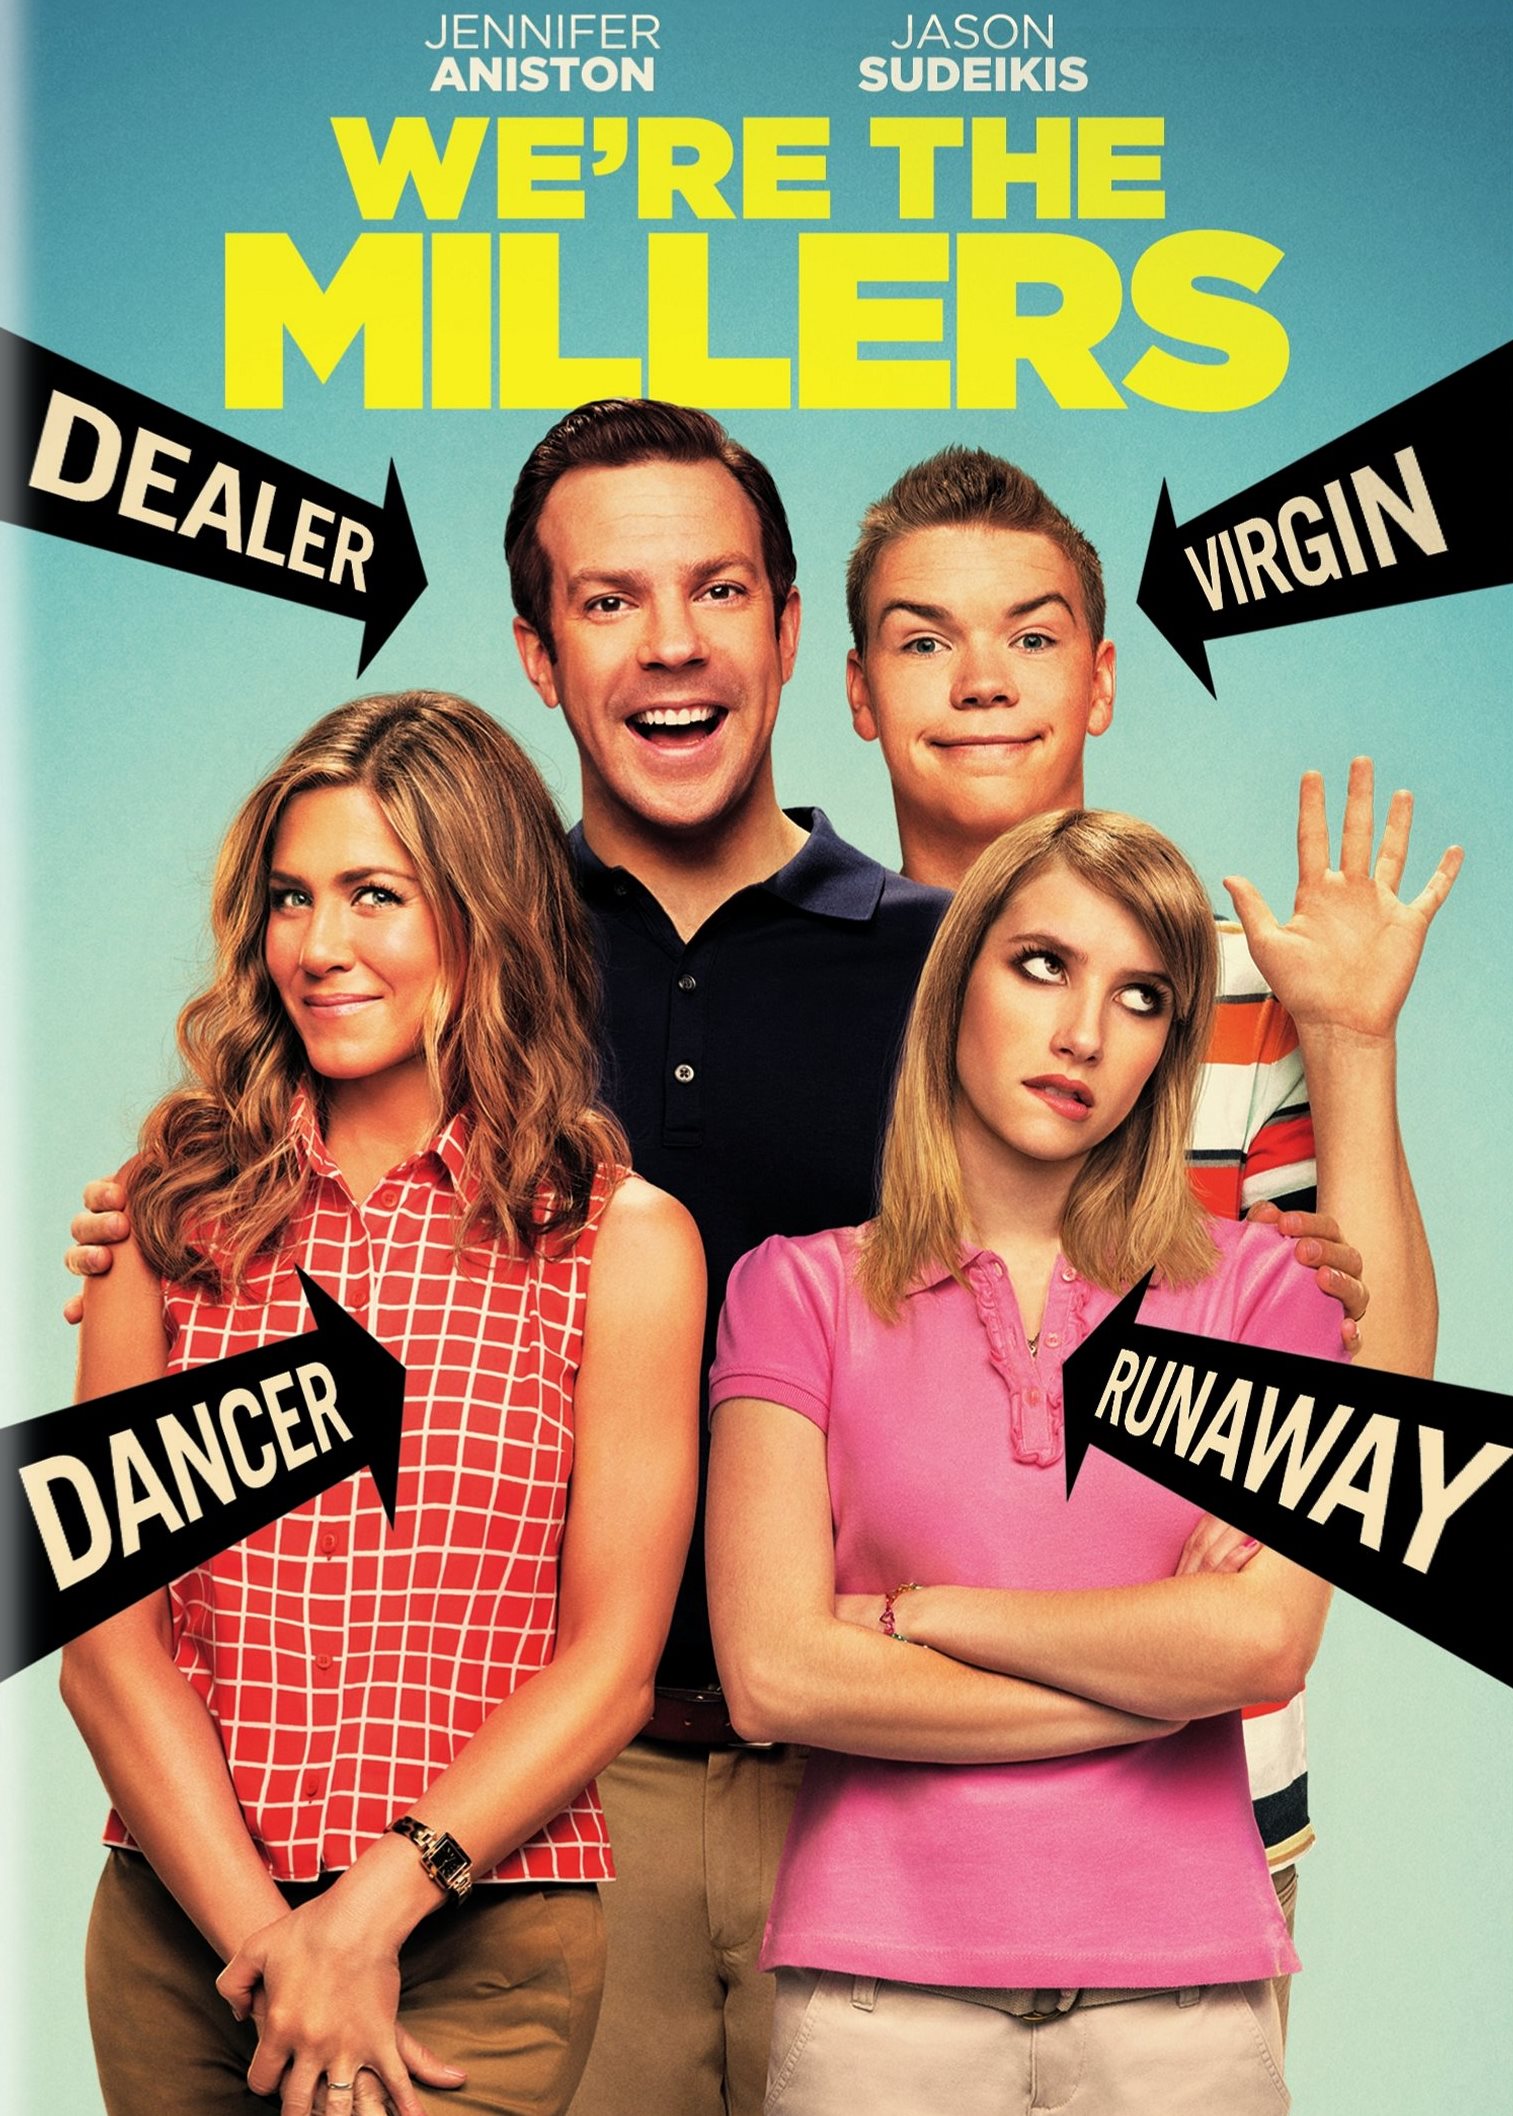 Laura leigh were the millers role